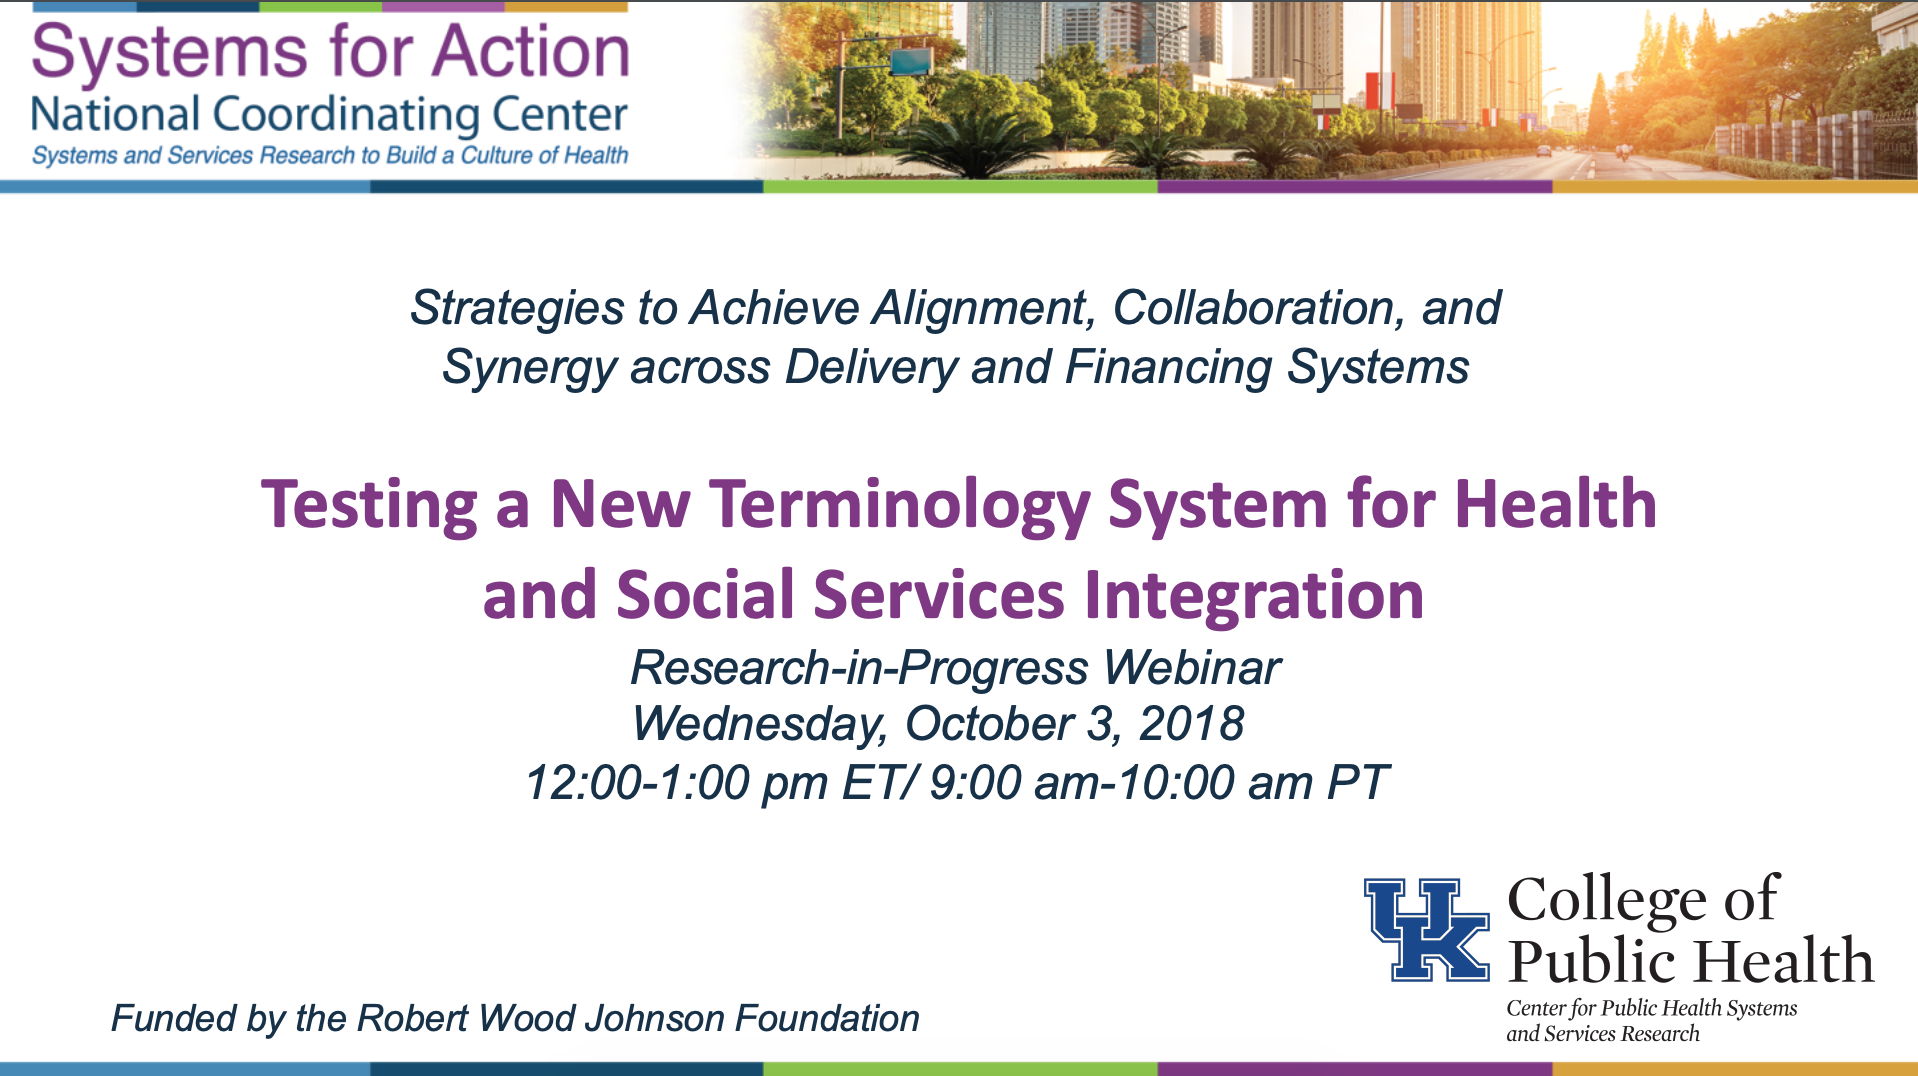 Strategies to Achieve Alignment, Collaboration, and Synergy across Delivery and Financing Systems: Testing a New Terminology System for Health and Social Services Integration